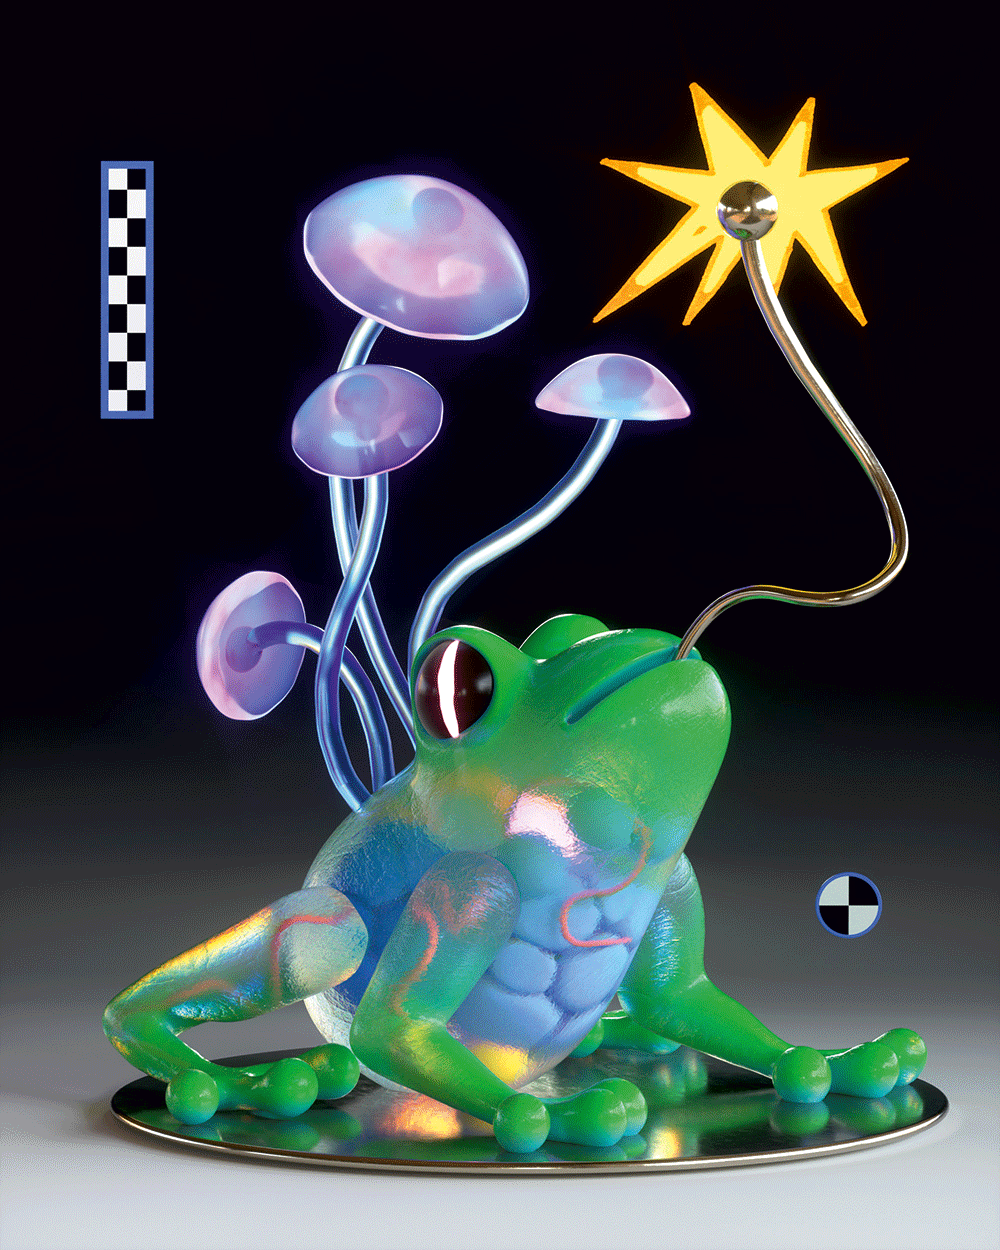 3D Sculpture of a frog with opaque shrooms and a golden tongue by Jack Sachs